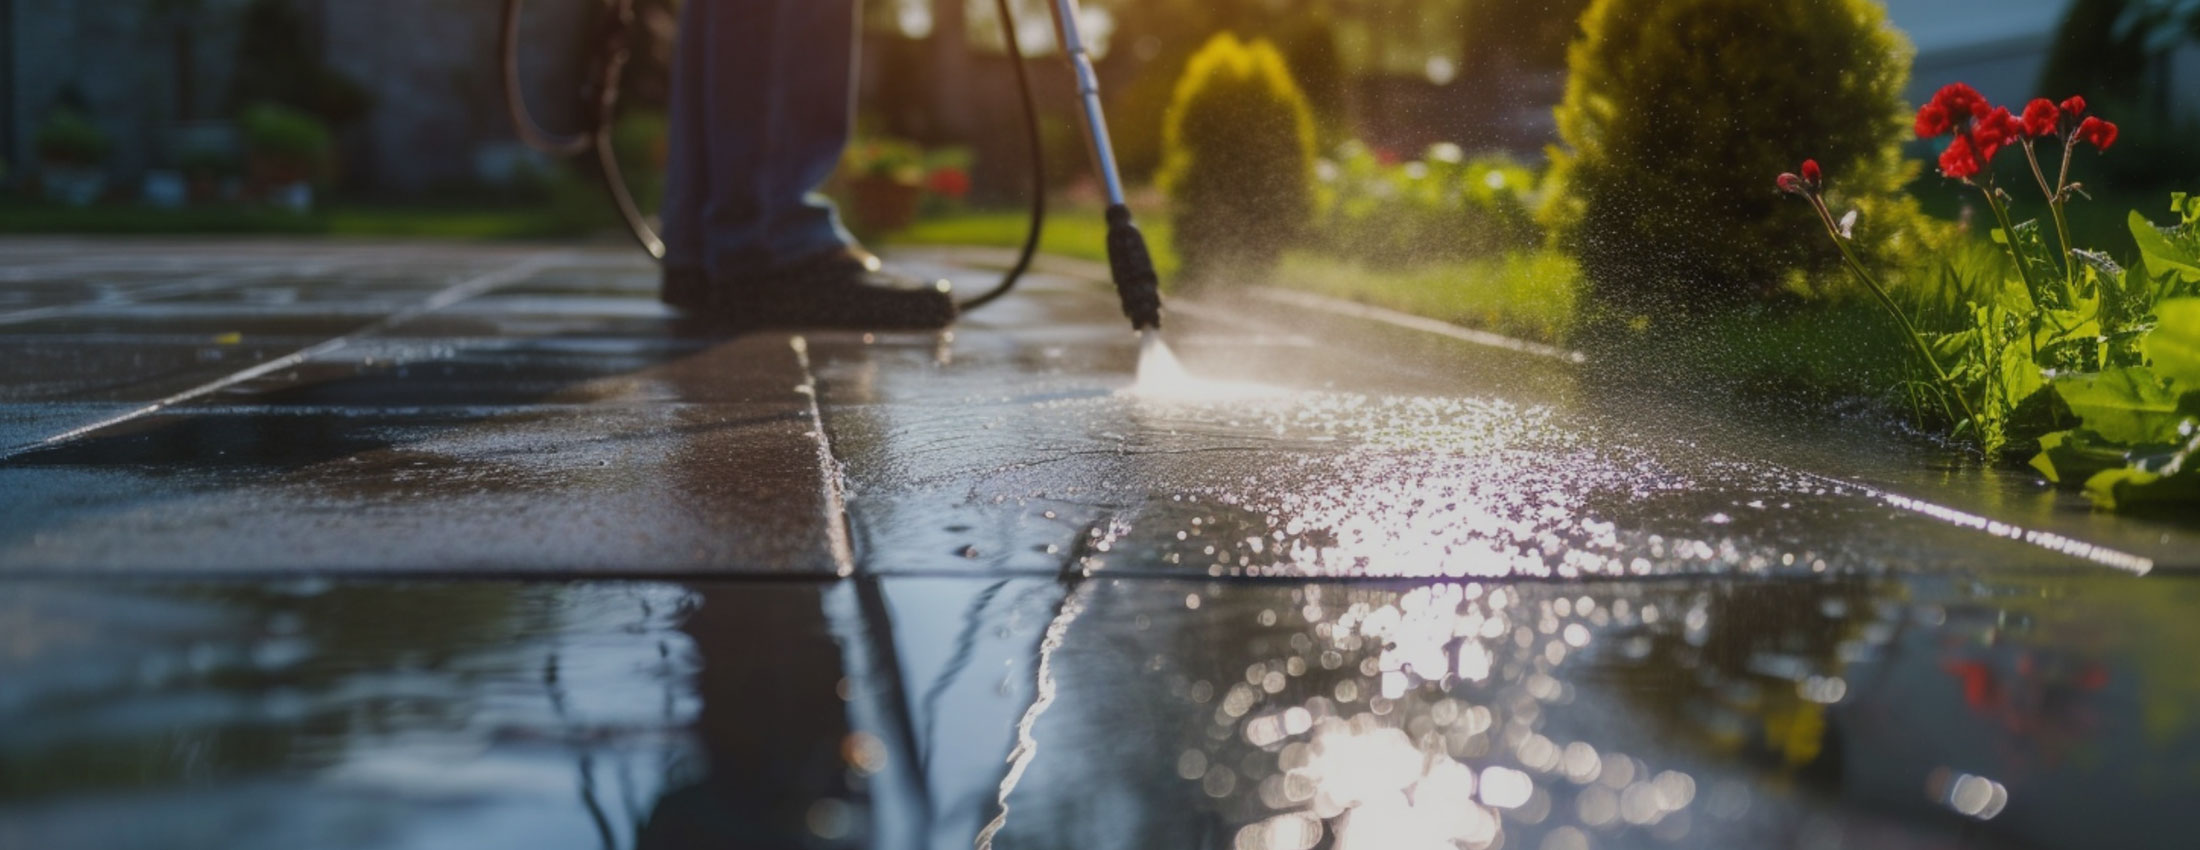 image of employee of pacific spray wash cleaning driveway